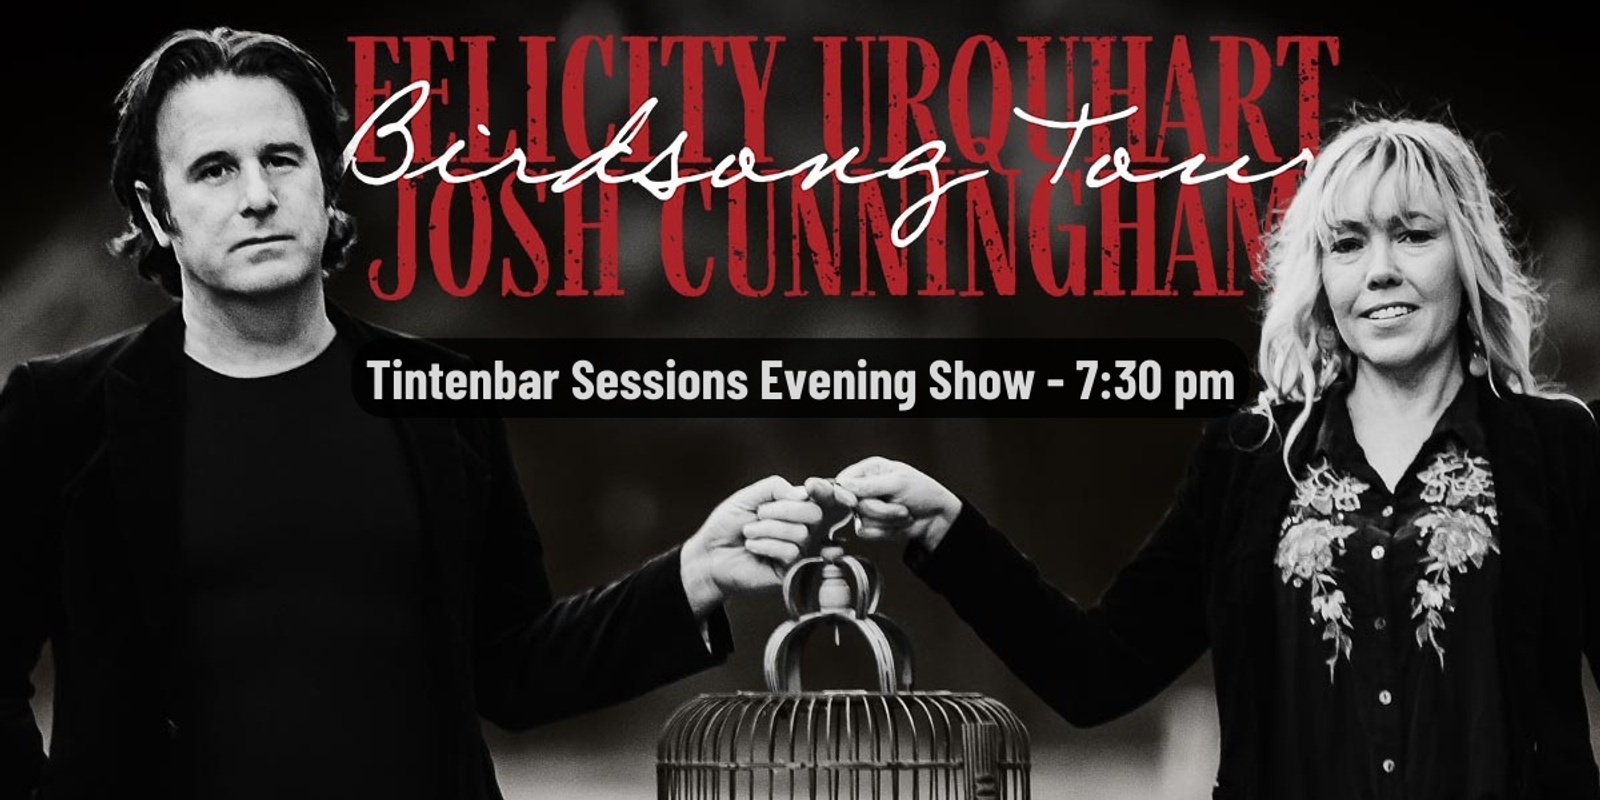 Banner image for Felicity Urquhart and Josh Cunningham (of The Waifs) at Tintenbar Hall Evening Show